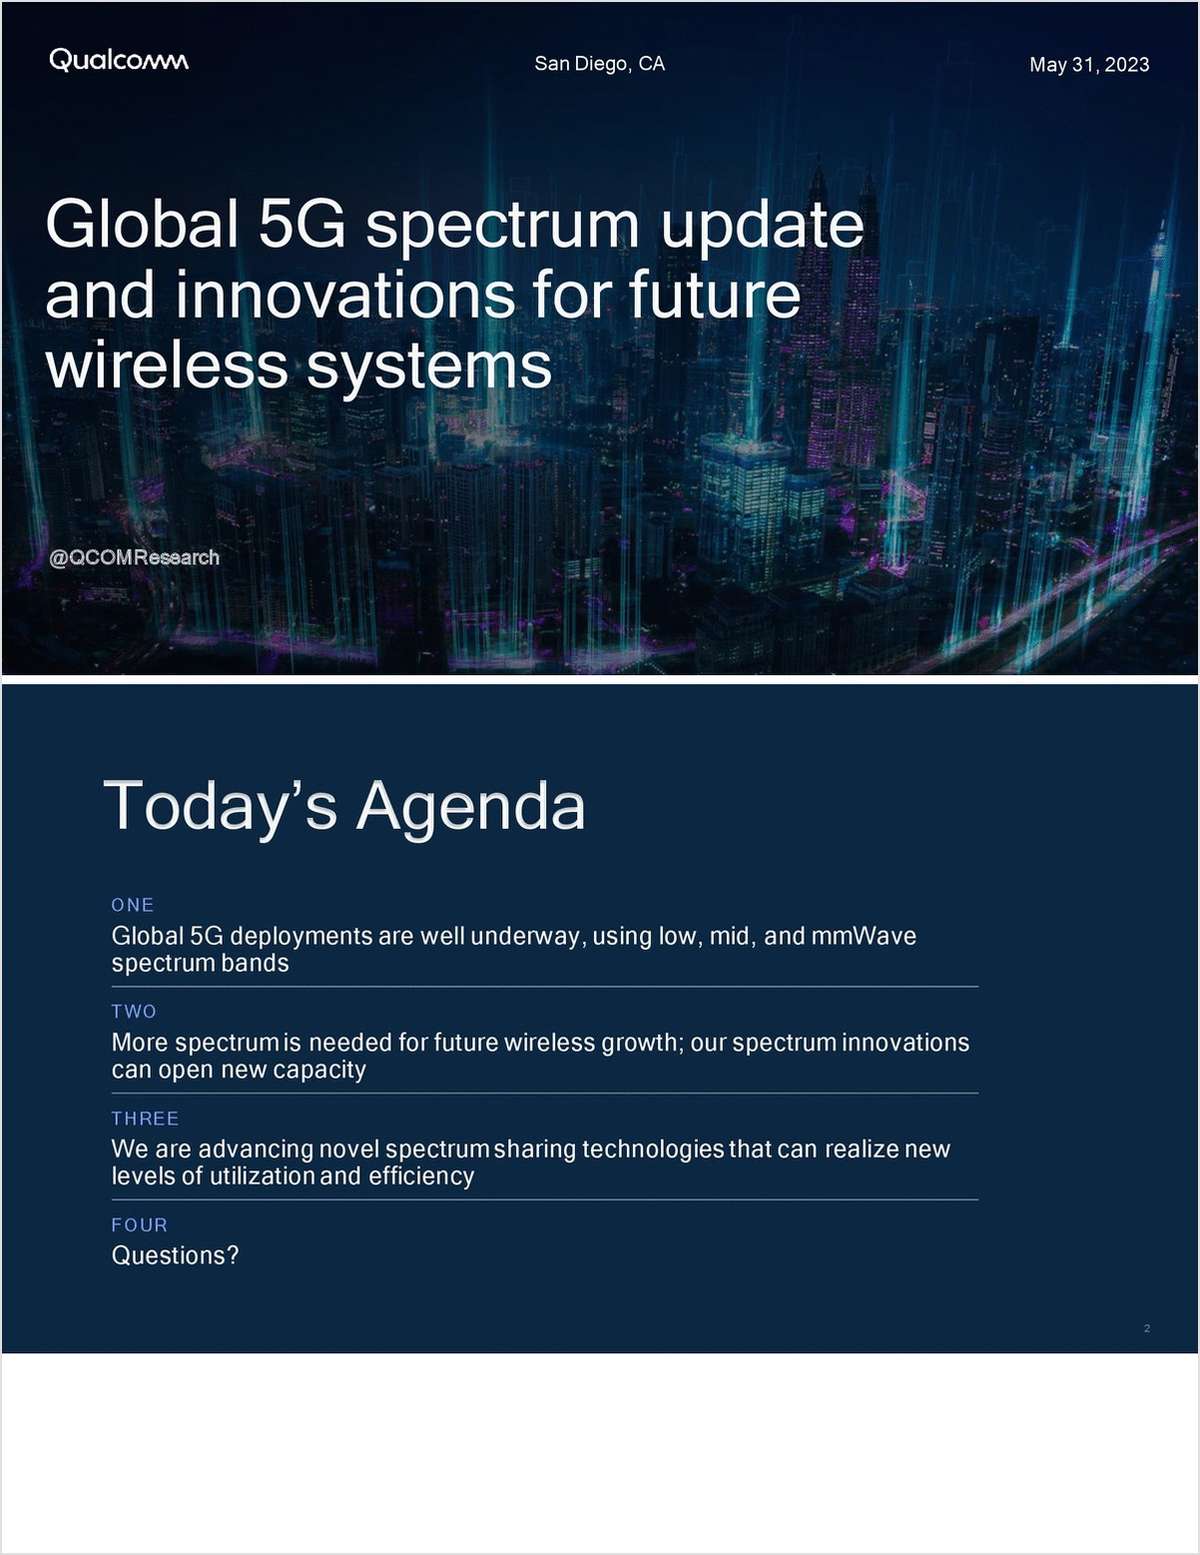 Unlocking spectrum innovations for 5G Advanced and 6G to support future wireless growth